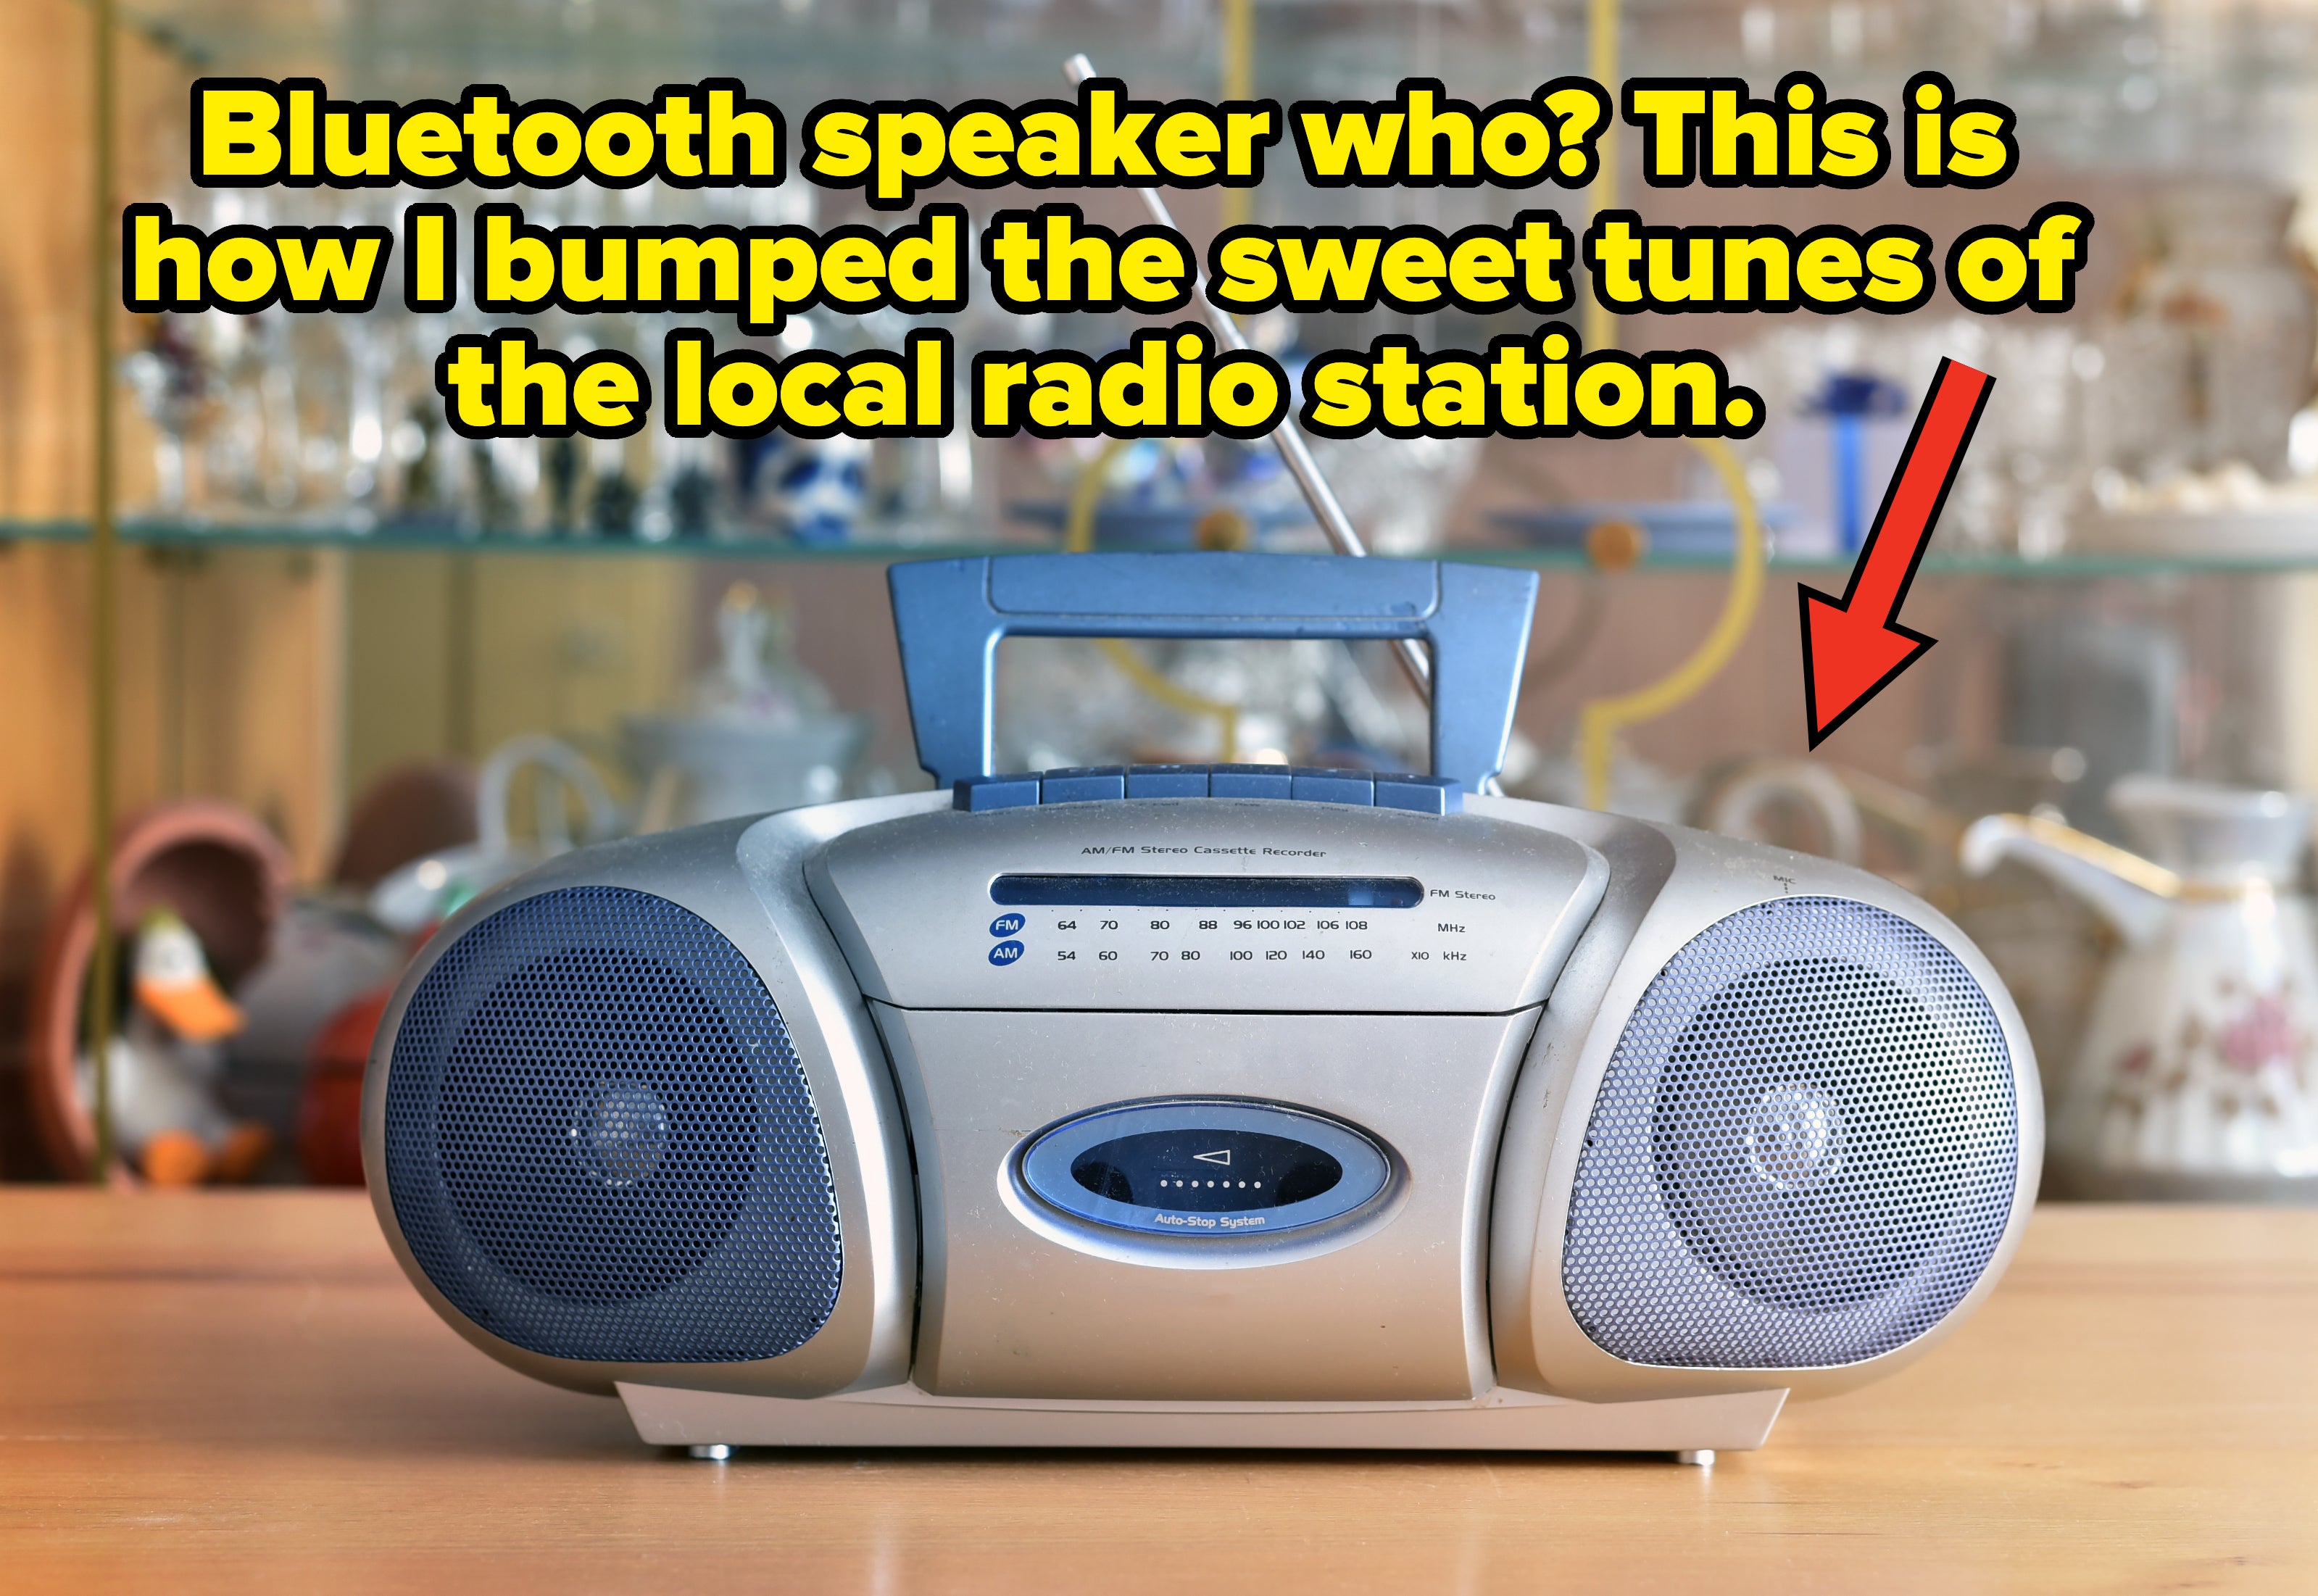 old stereo with text, bluetooth speaker who? this is how i bumped the sweet tunes of the local radio station